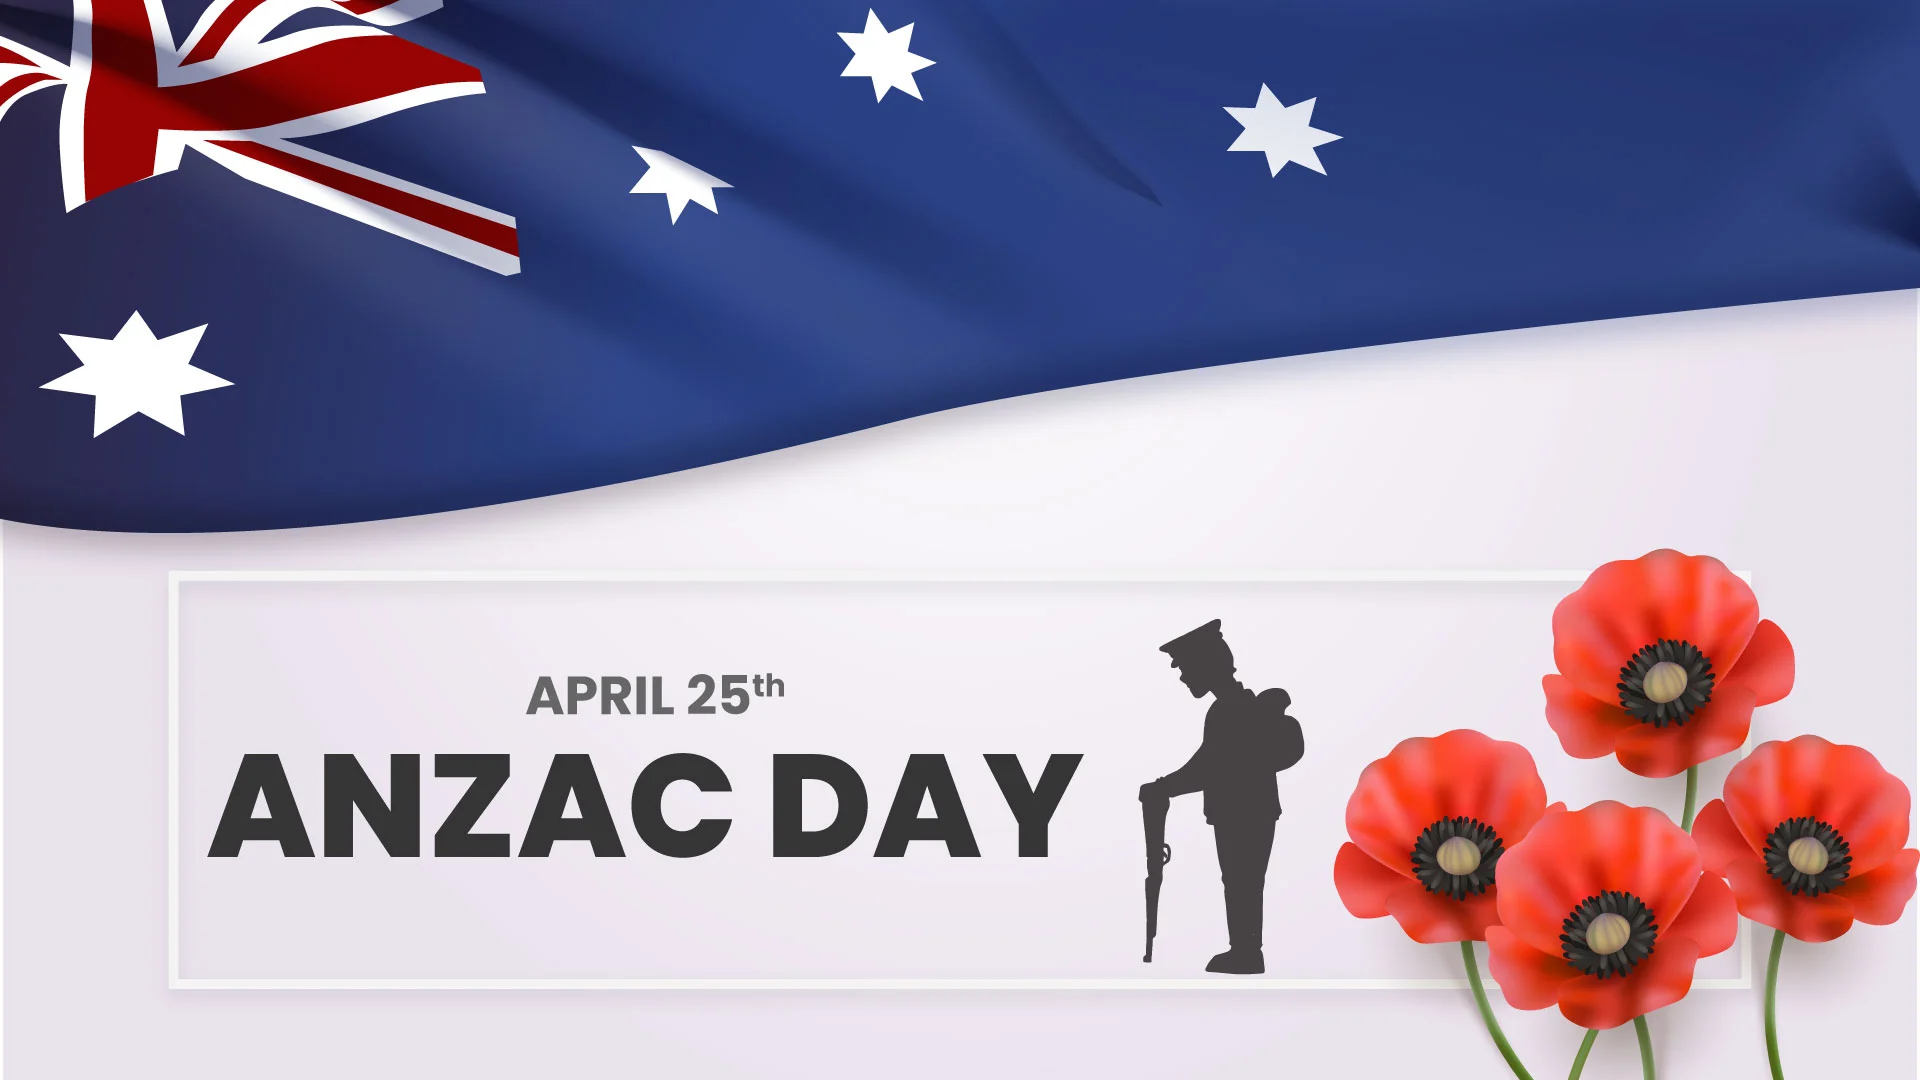 The Legacy of ANZAC Day